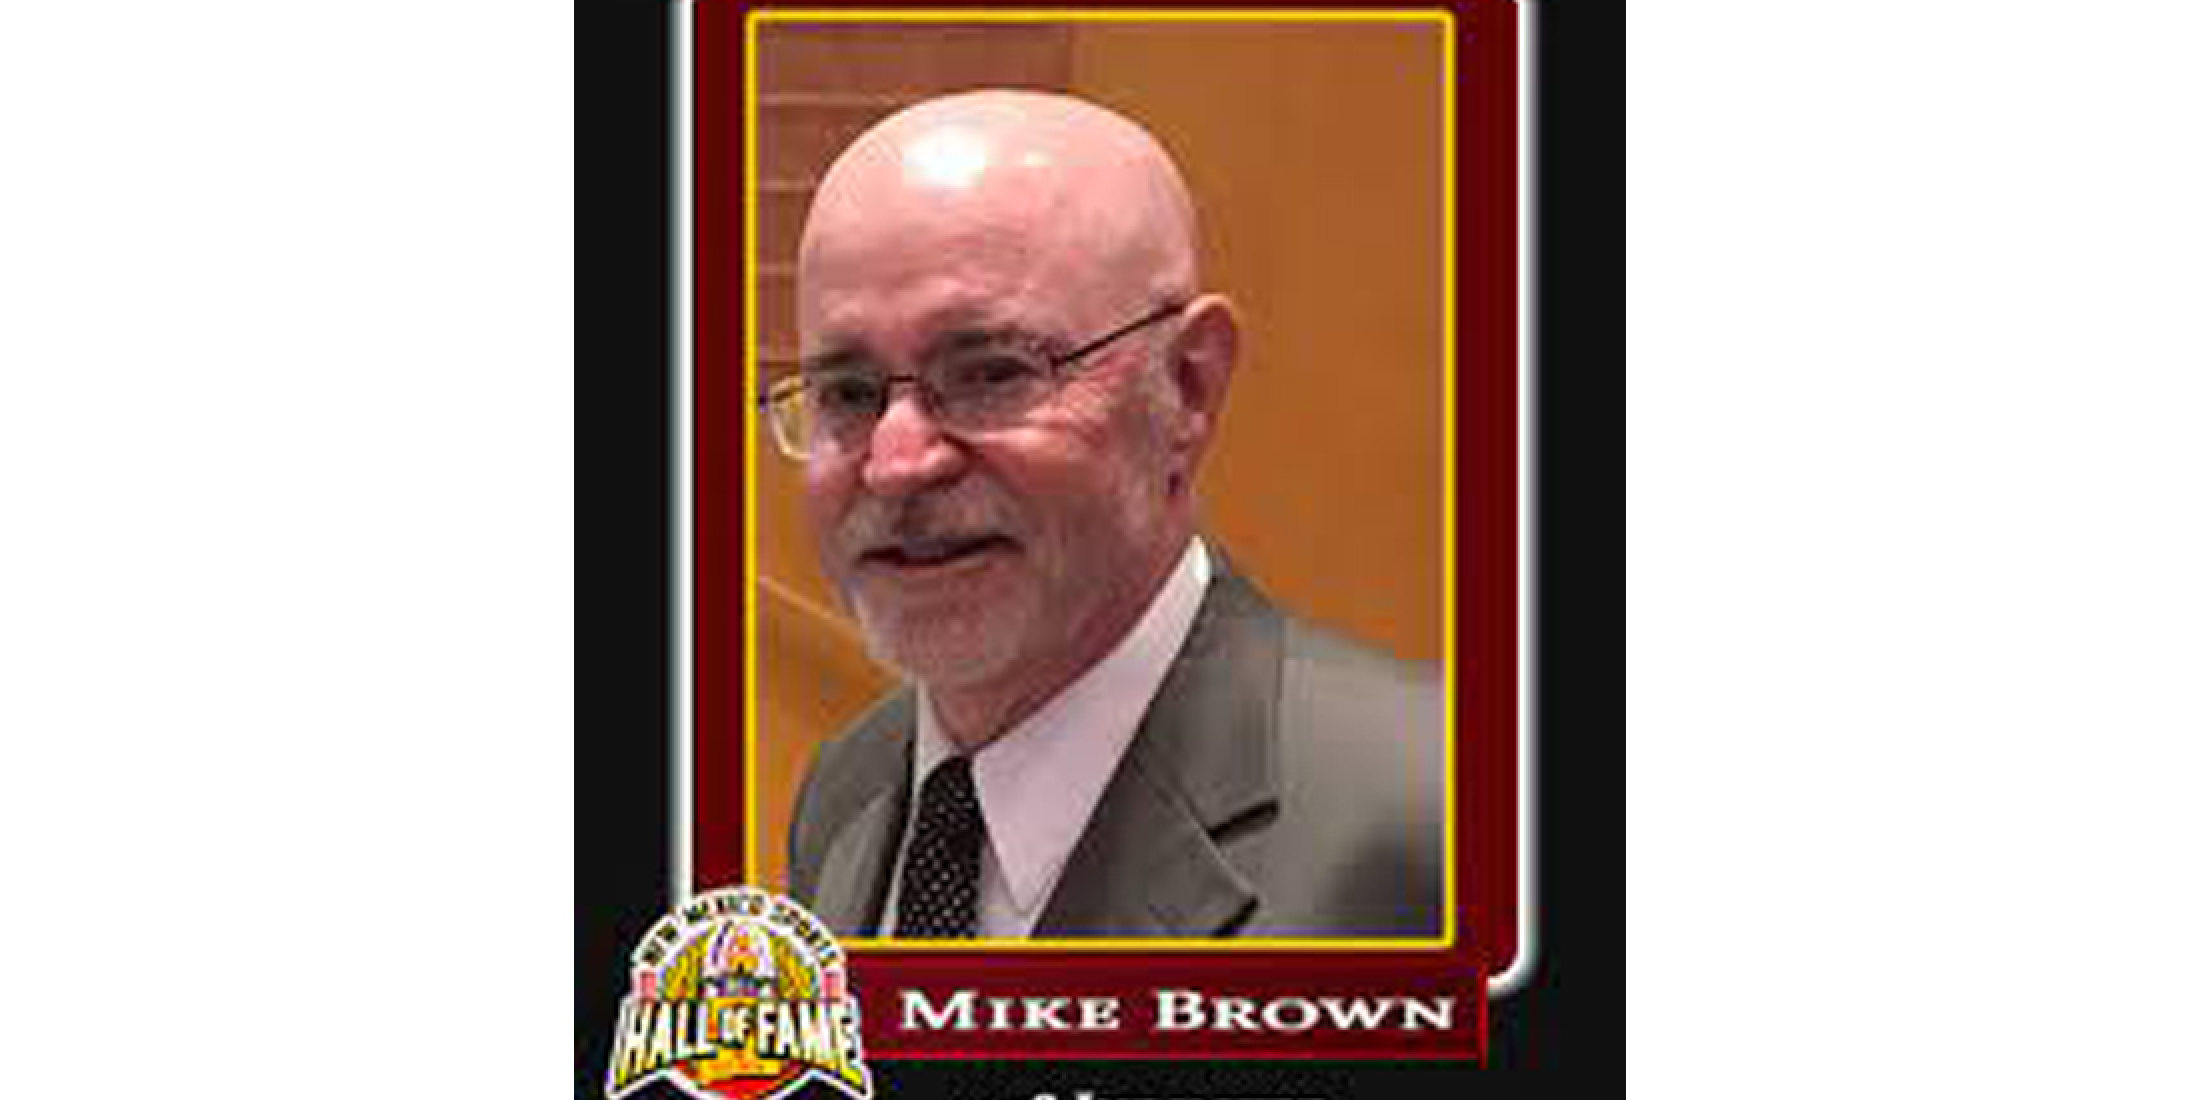 HALL OF FAME BASKETBALL COACH MIKE BROWN PASSED AWAY NMAA